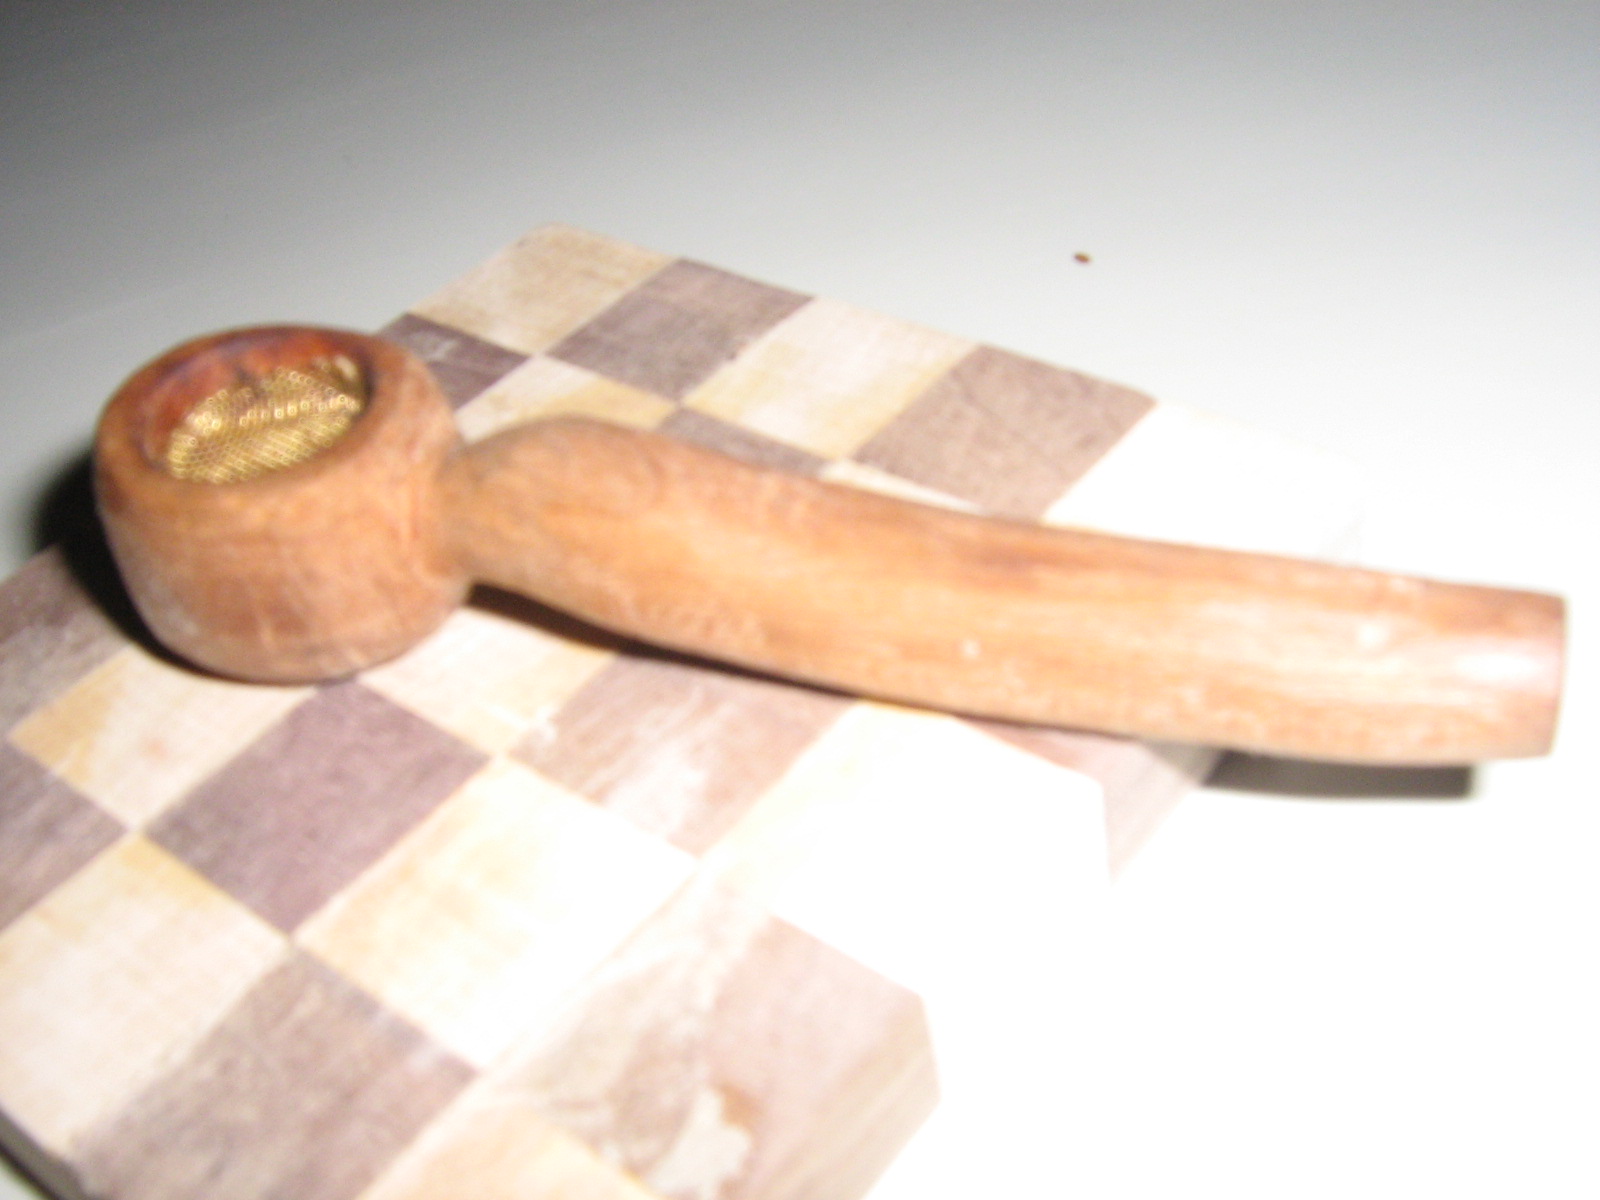 How to make a Wooden Pipe out of a Single Piece of Wood